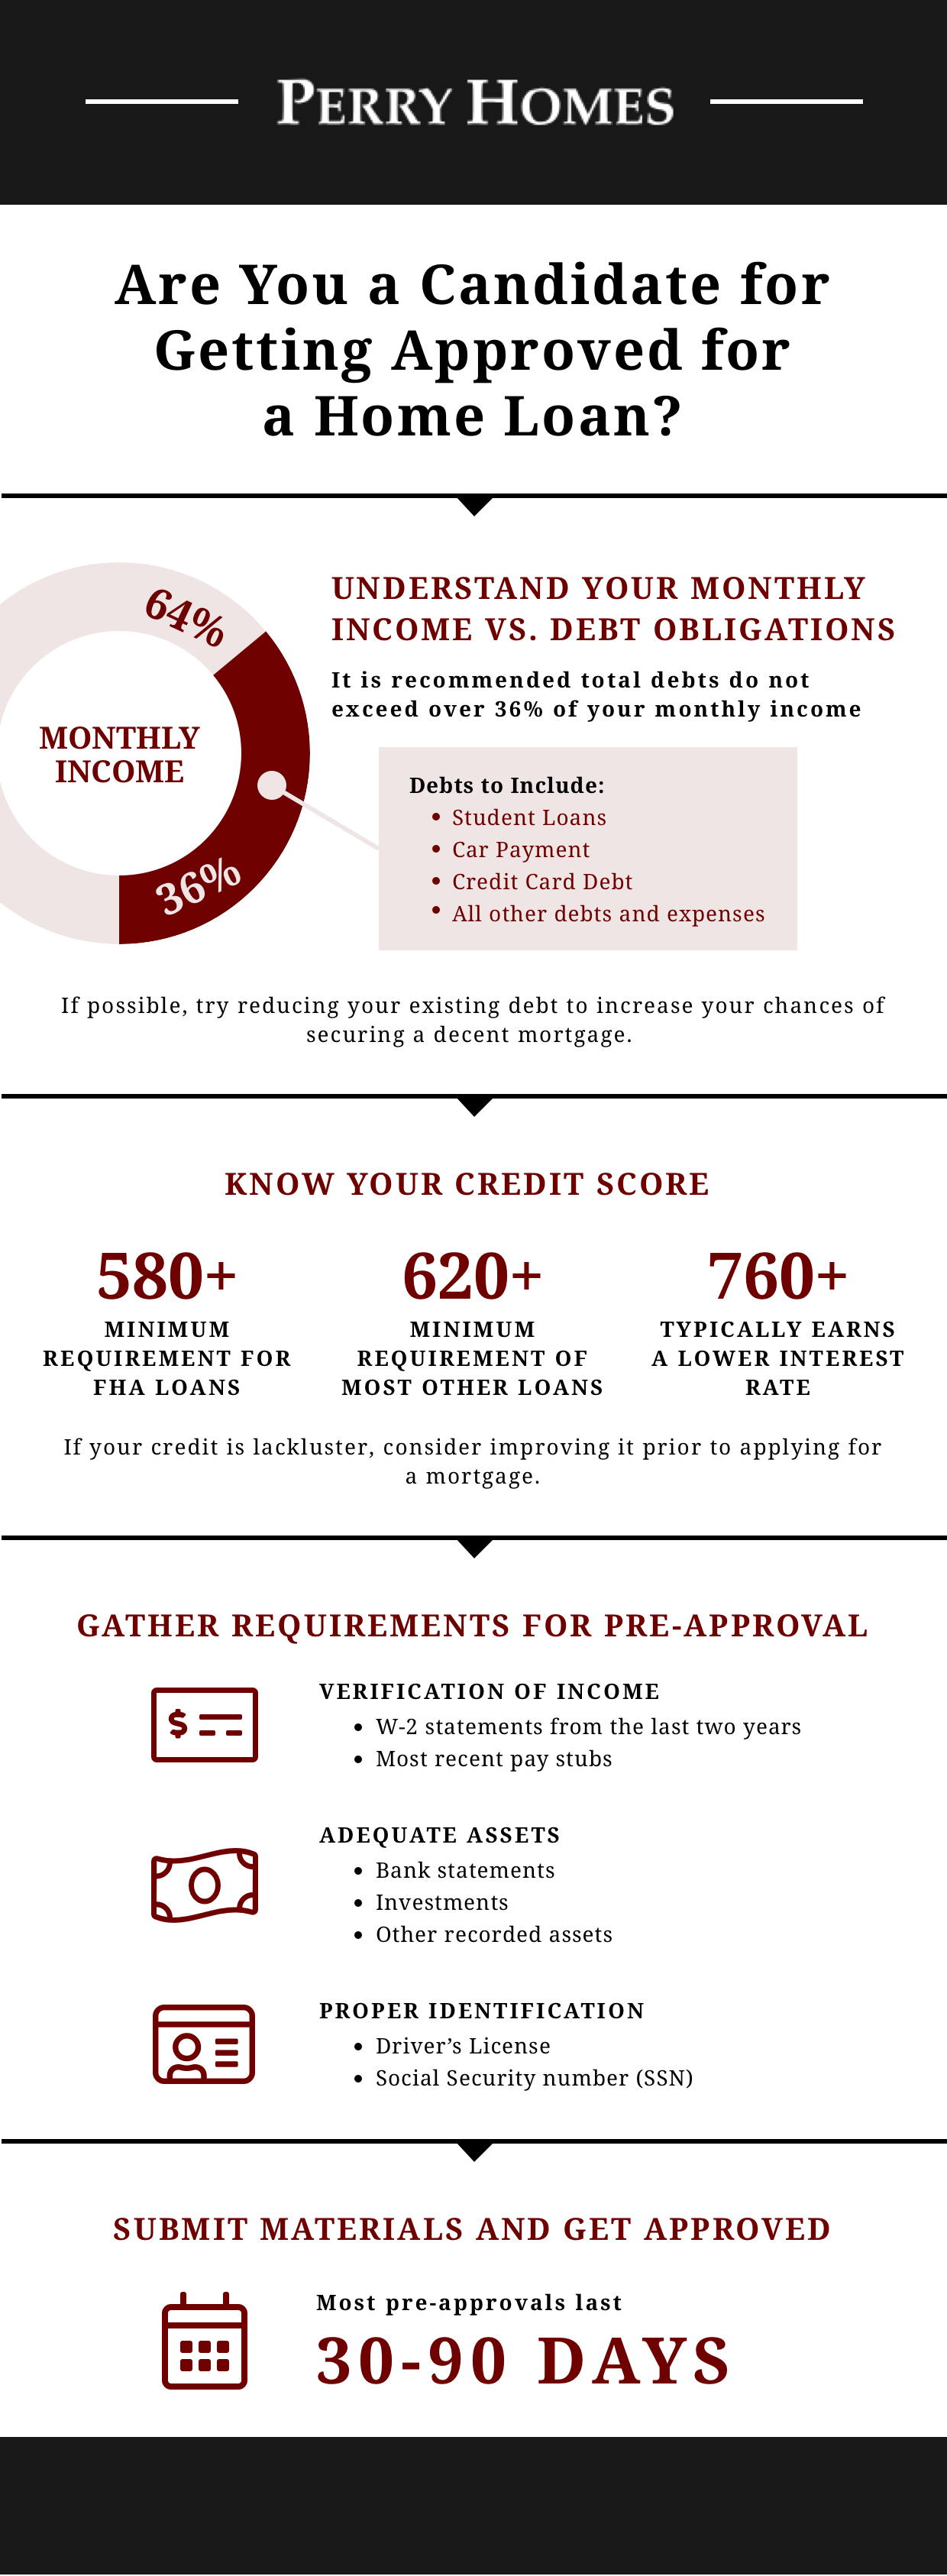 When applying for a home loan one must understand their income vs. debt obligations and credit score. Most pre-approvals take 30 - 90 days.